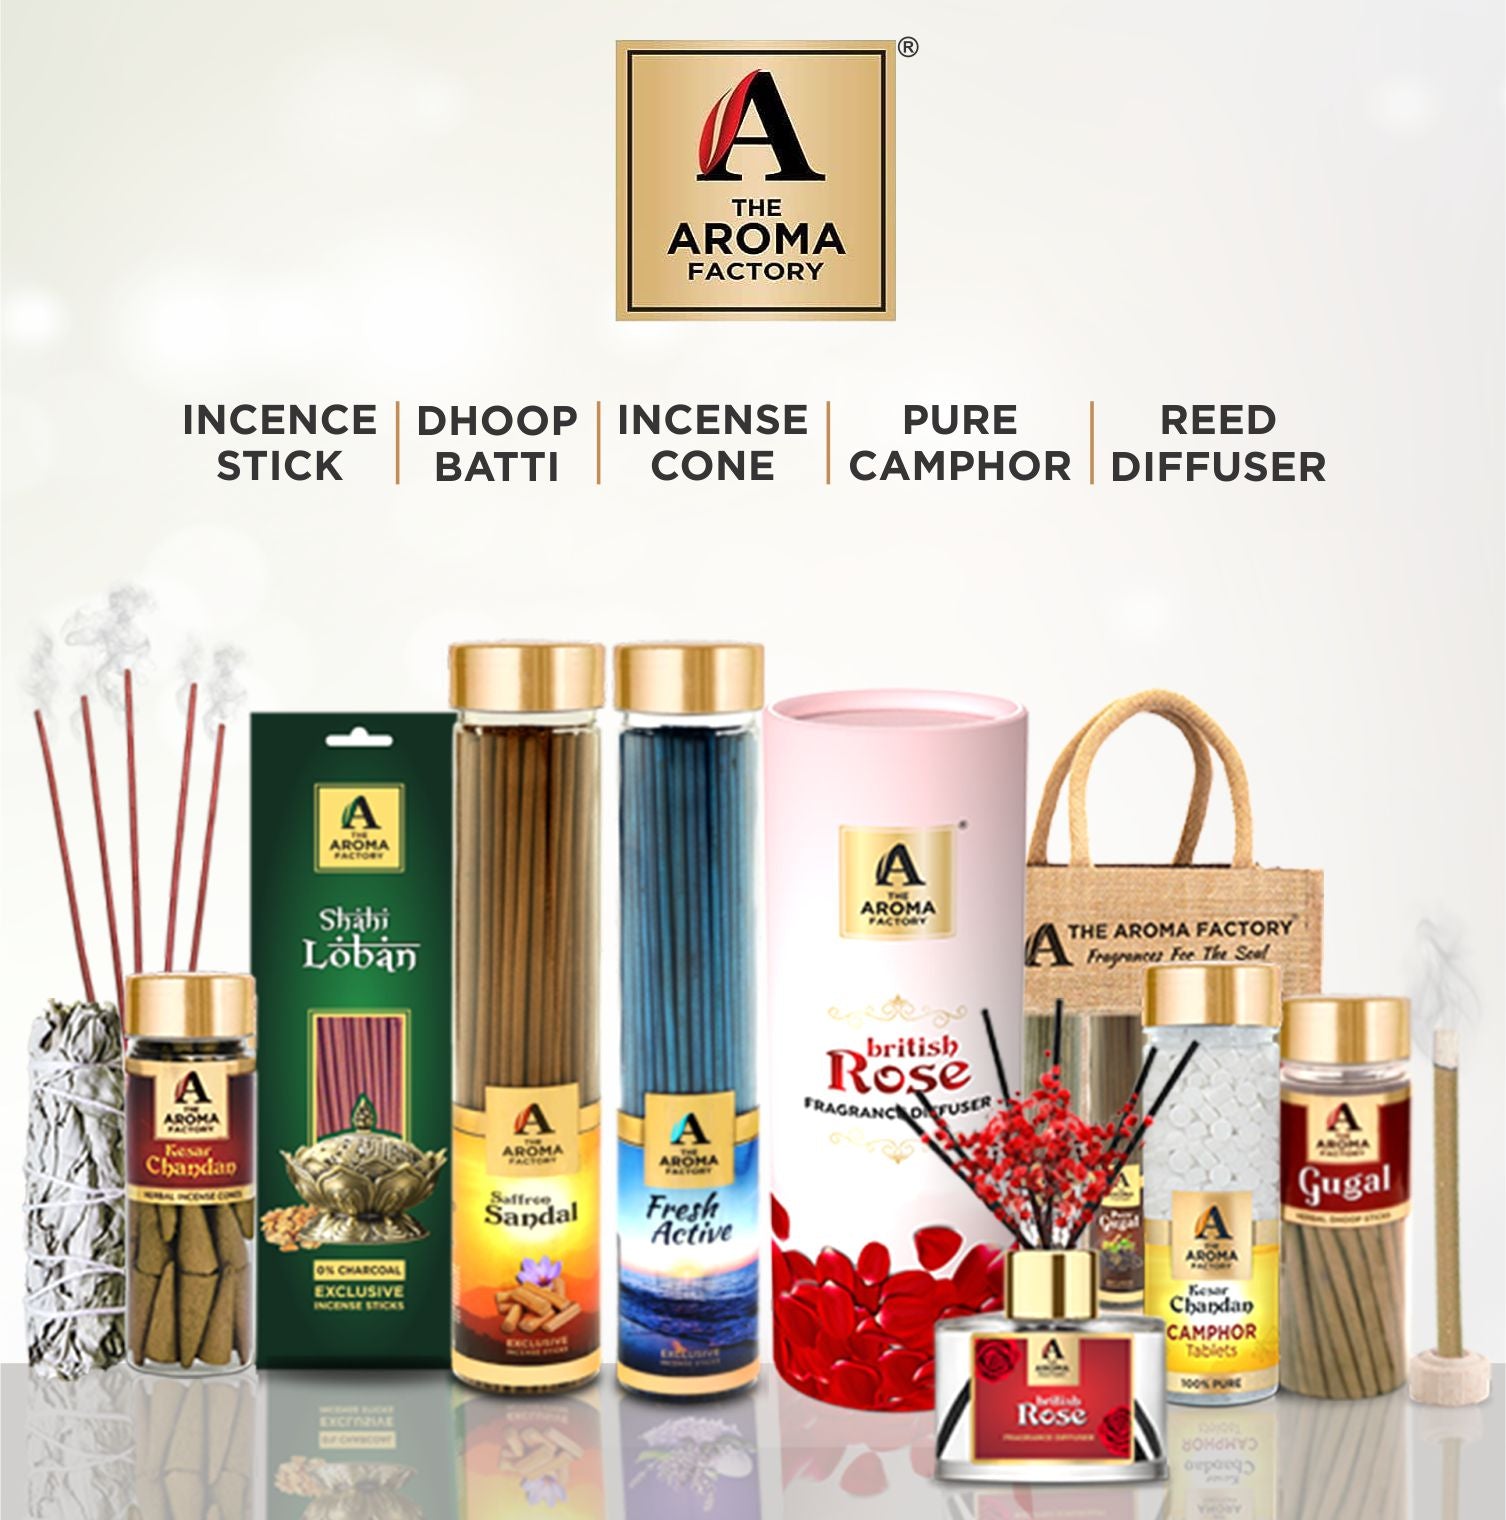 The Aroma Factory Happy Birthday Sister Gift with Card, Lemongrass Fragrance Reed Diffuser Set (1 Box + 1 Card)